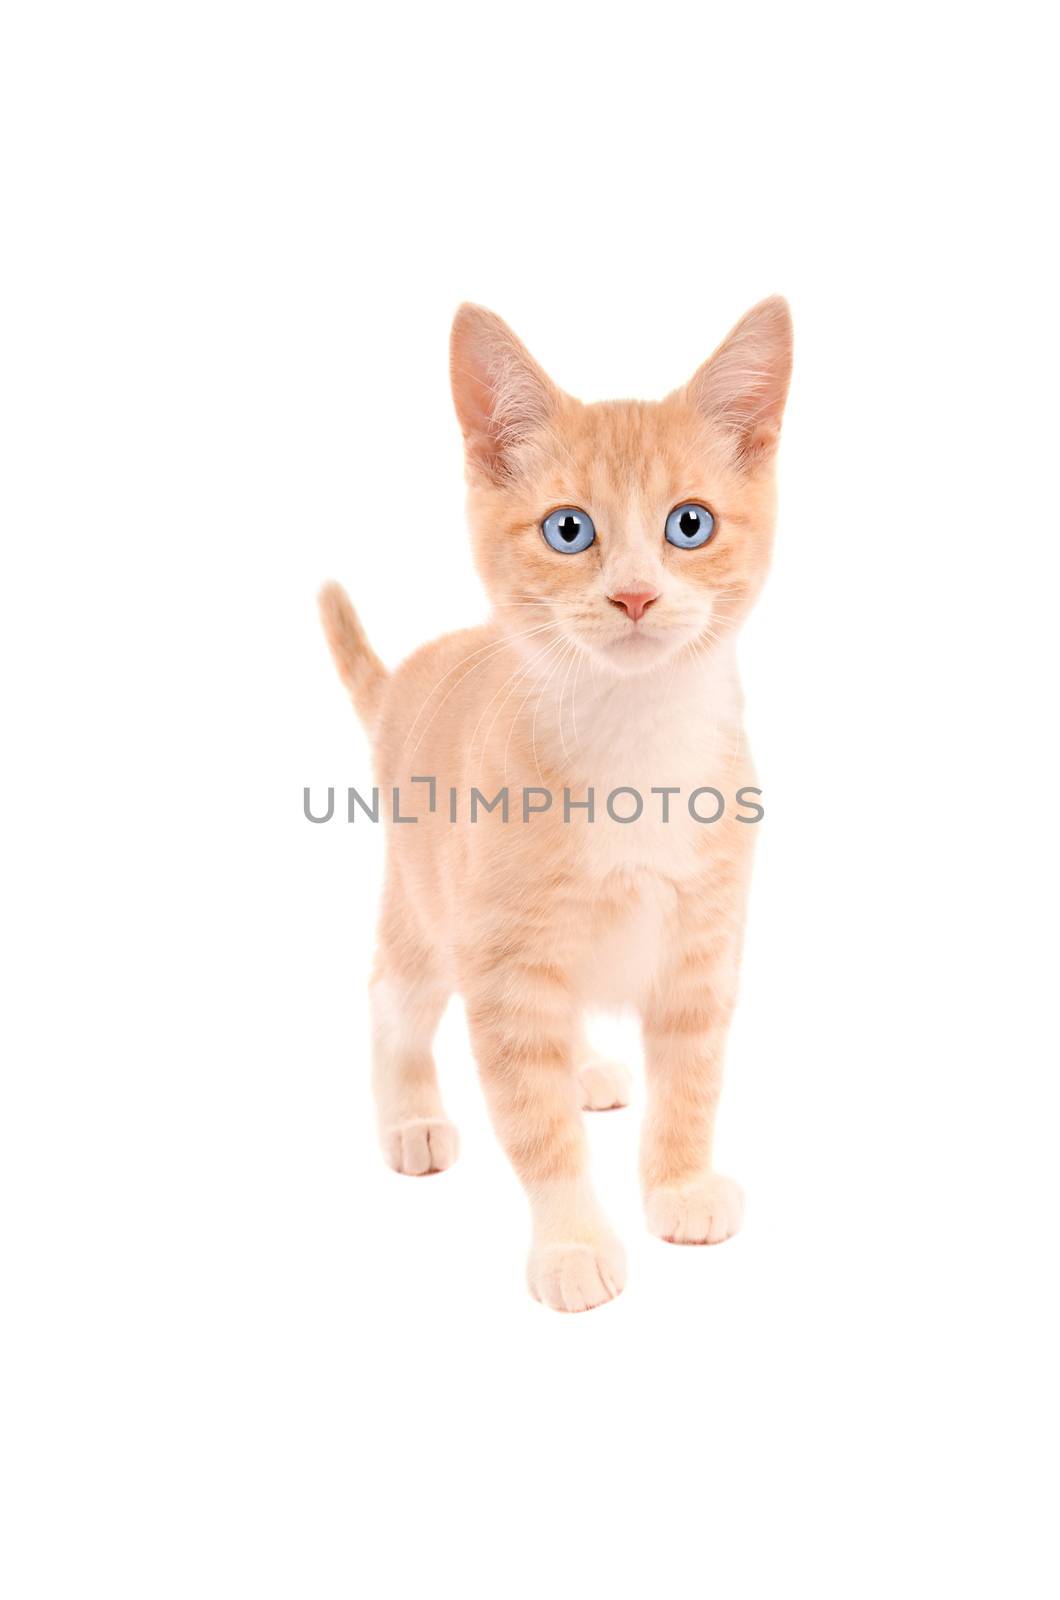 An orange tabby standing on a white background